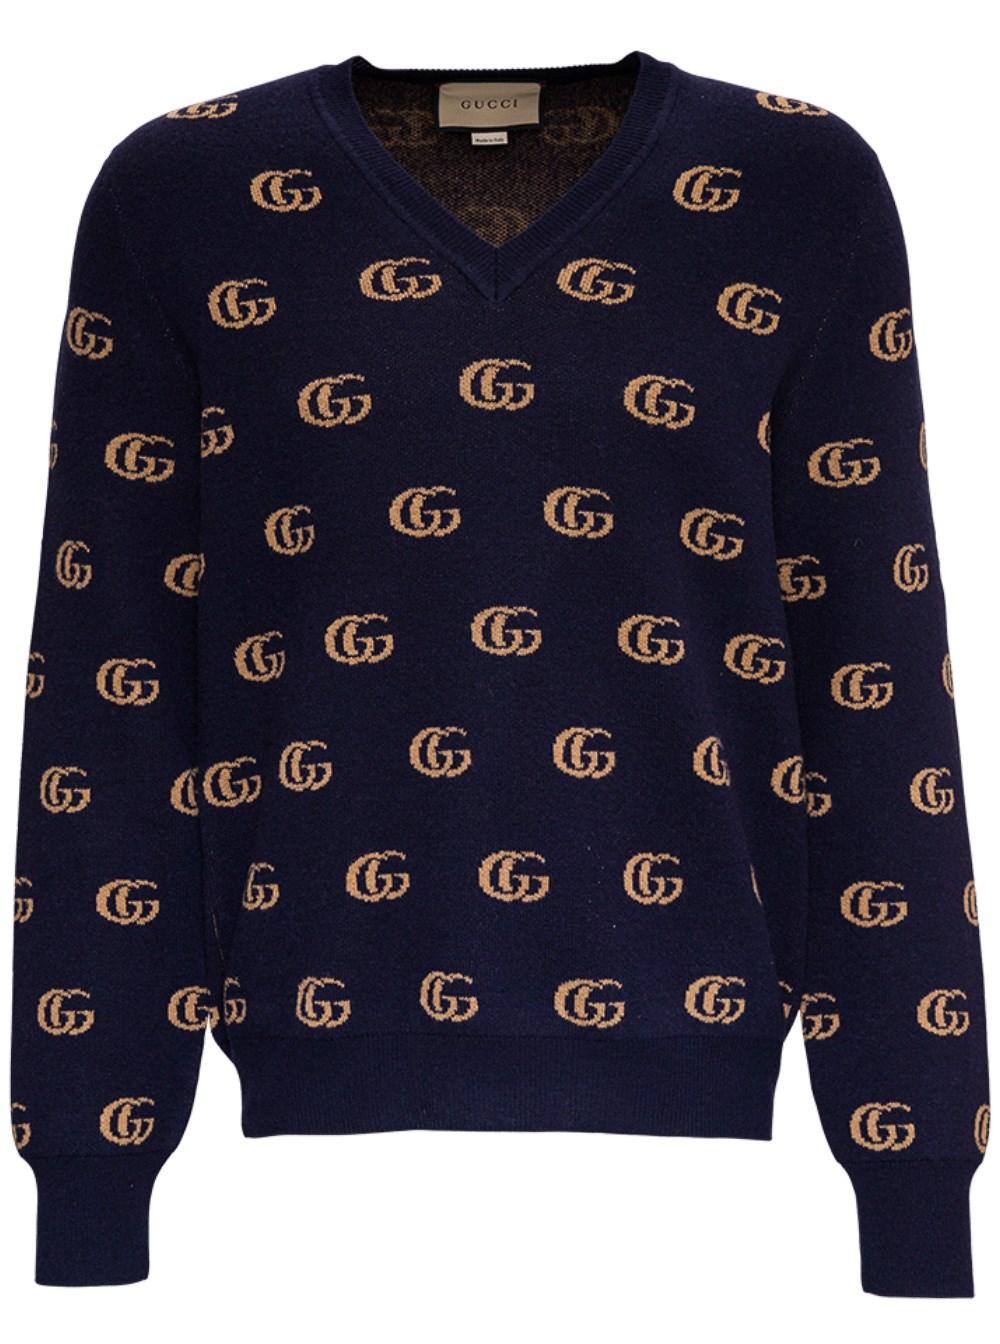 Væk usund slag Gucci Wool Sweater With Allover GG Logo in Blue for Men - Lyst